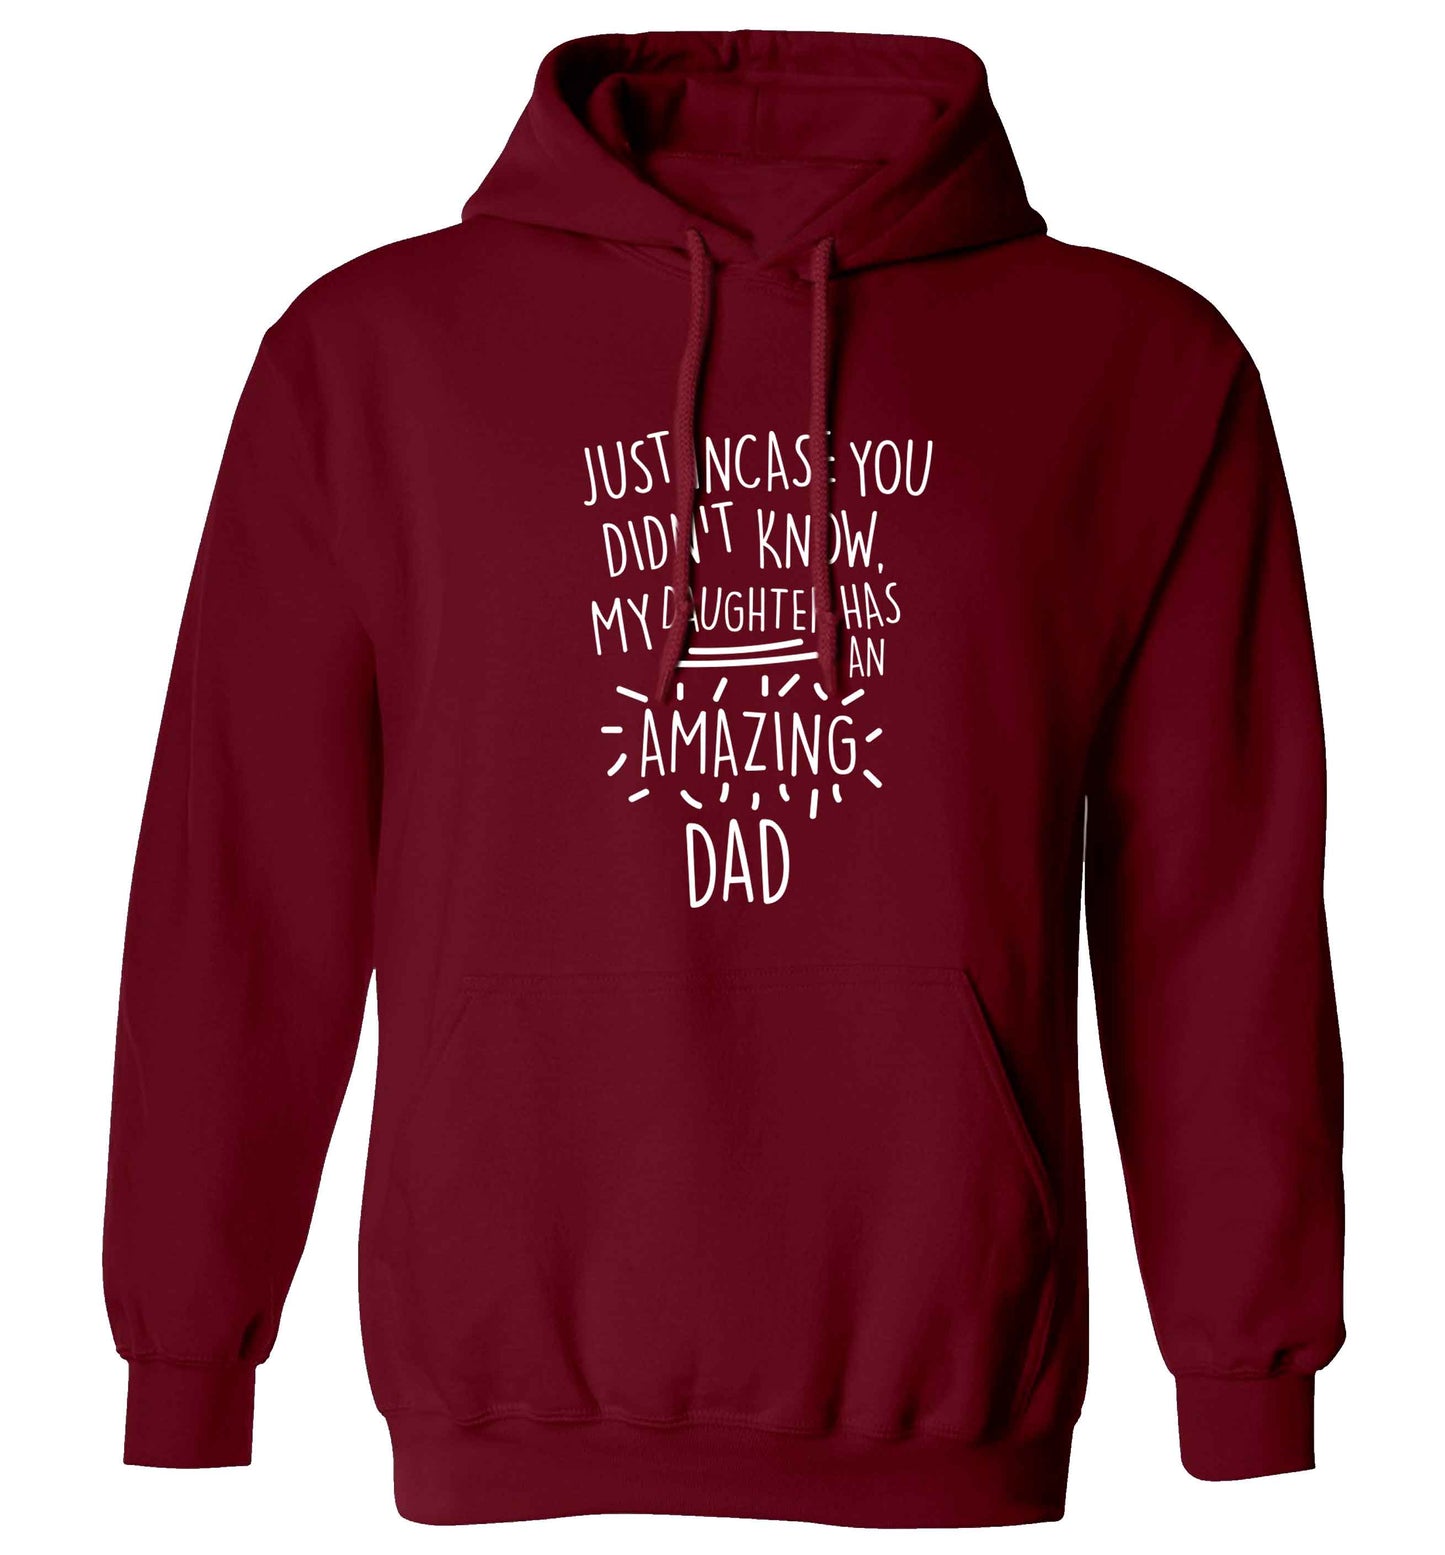 Just incase you didn't know my daughter has an amazing dad adults unisex maroon hoodie 2XL